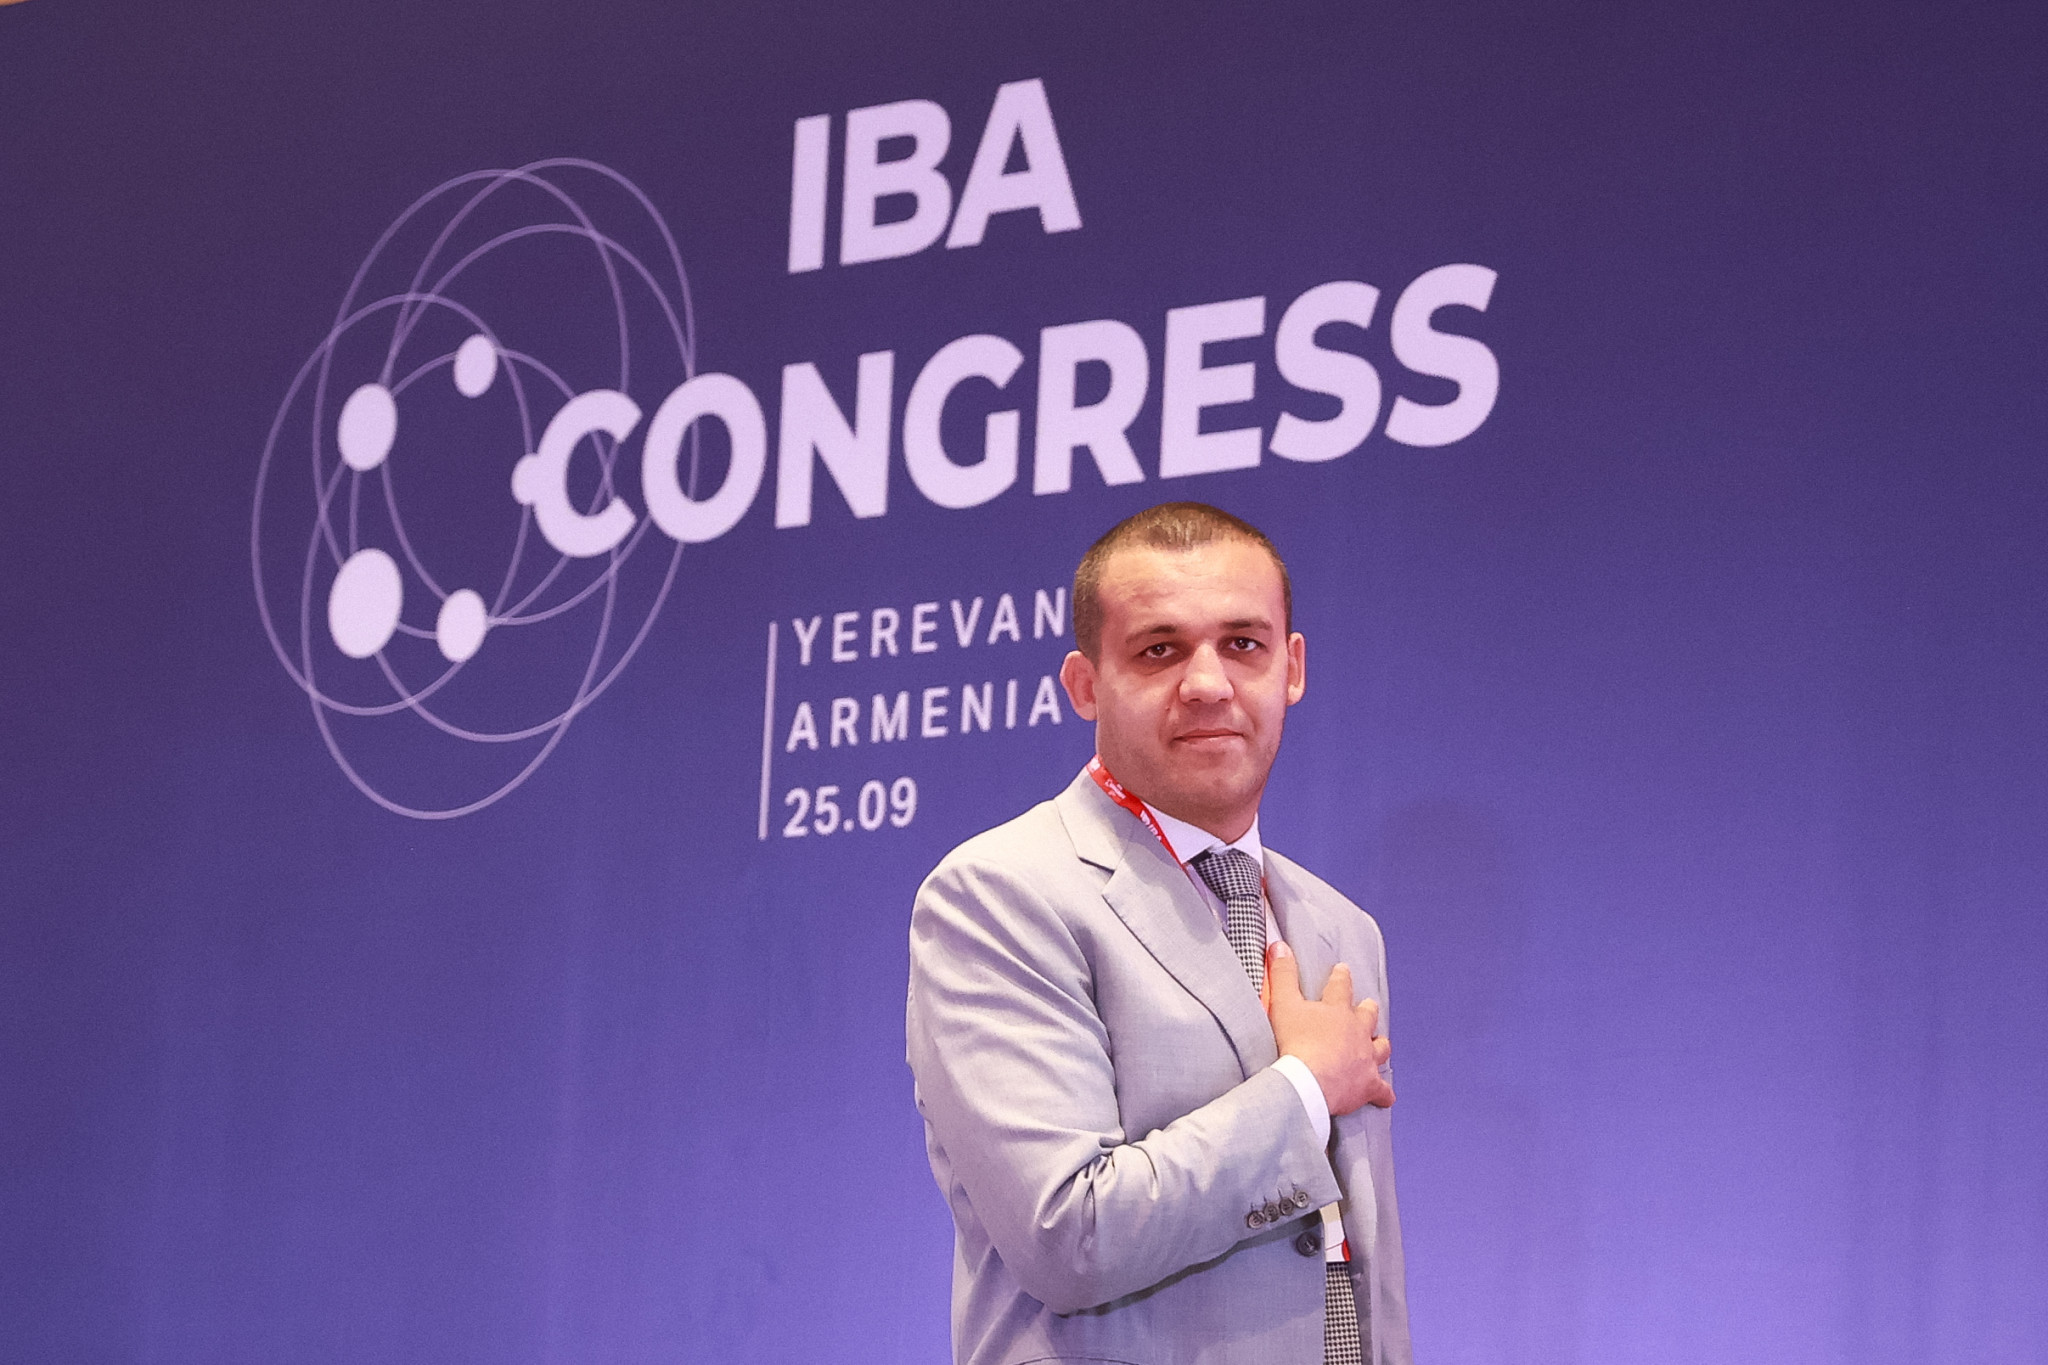 IBA has allowed Russian and Belarusian athletes to return to its competitions under their flags after Umar Kremlev's position as President was cemented at last month's Extraordinary Congress ©Getty Images